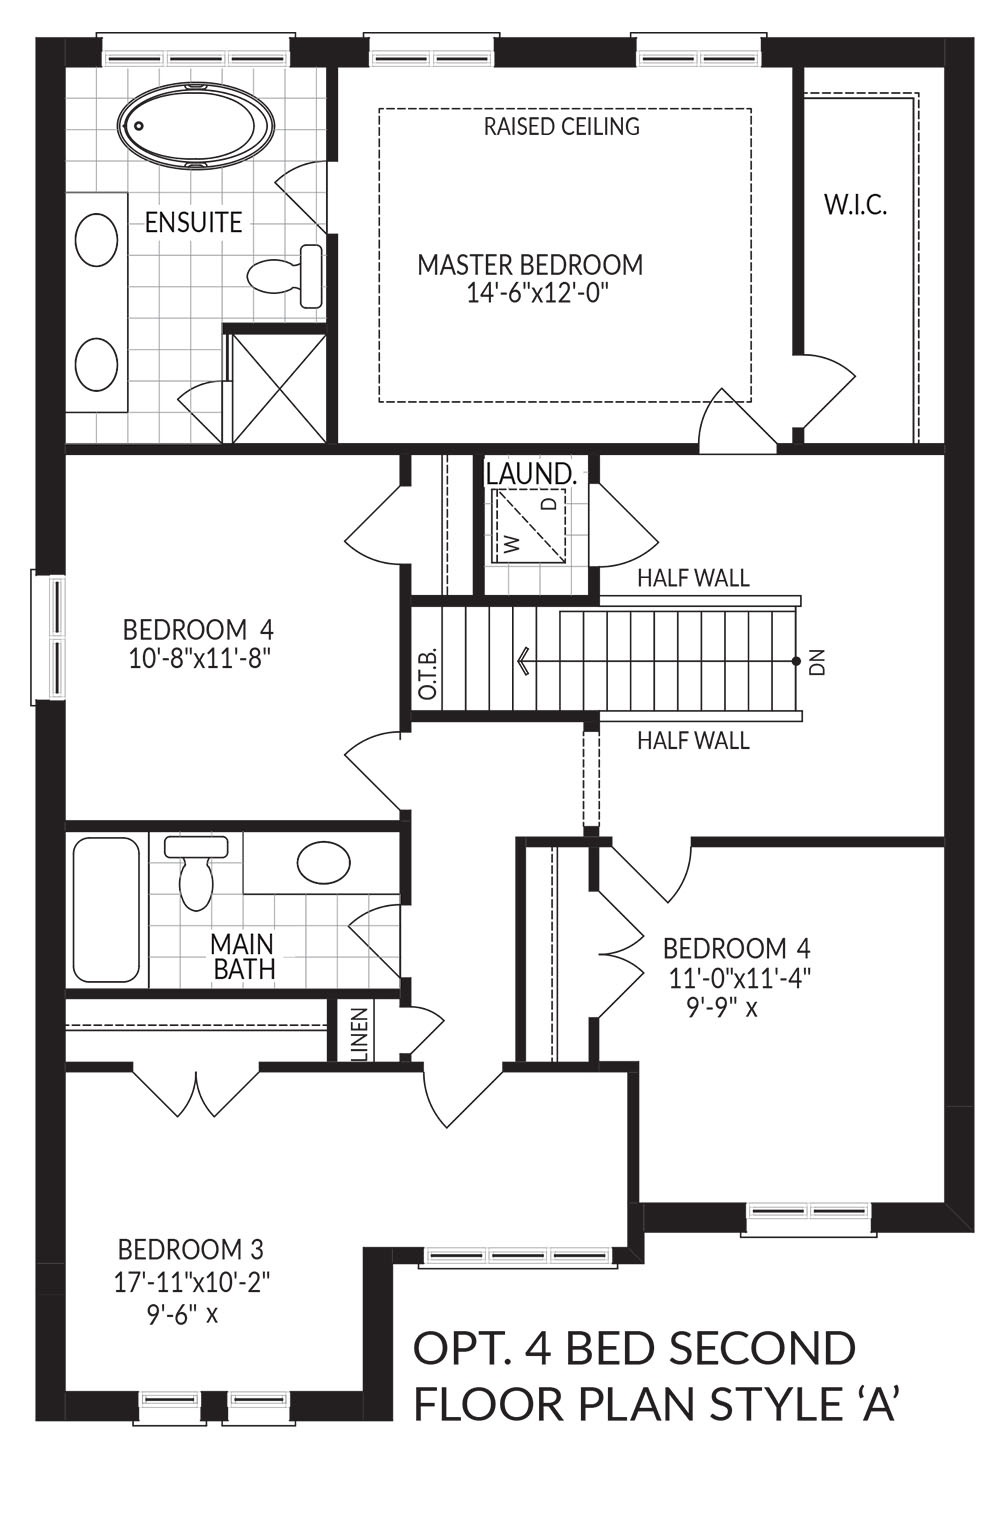 Fiona Opt. 4 bed second floor plan style A